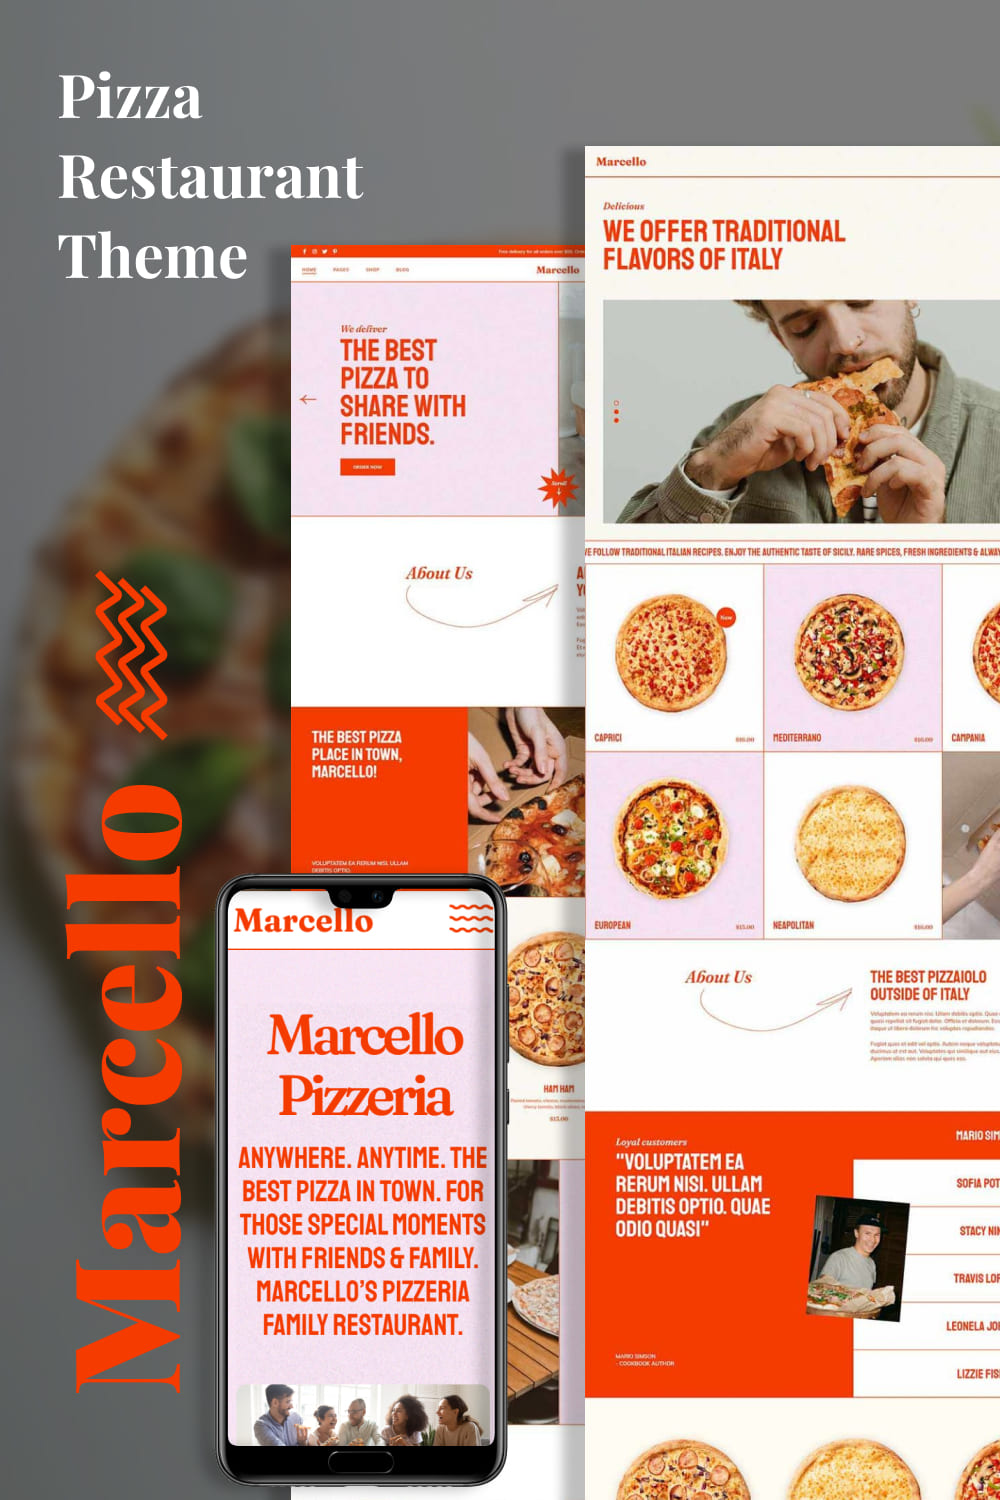 A collection of wonderful images of WordPress pages for a pizzeria restaurant.